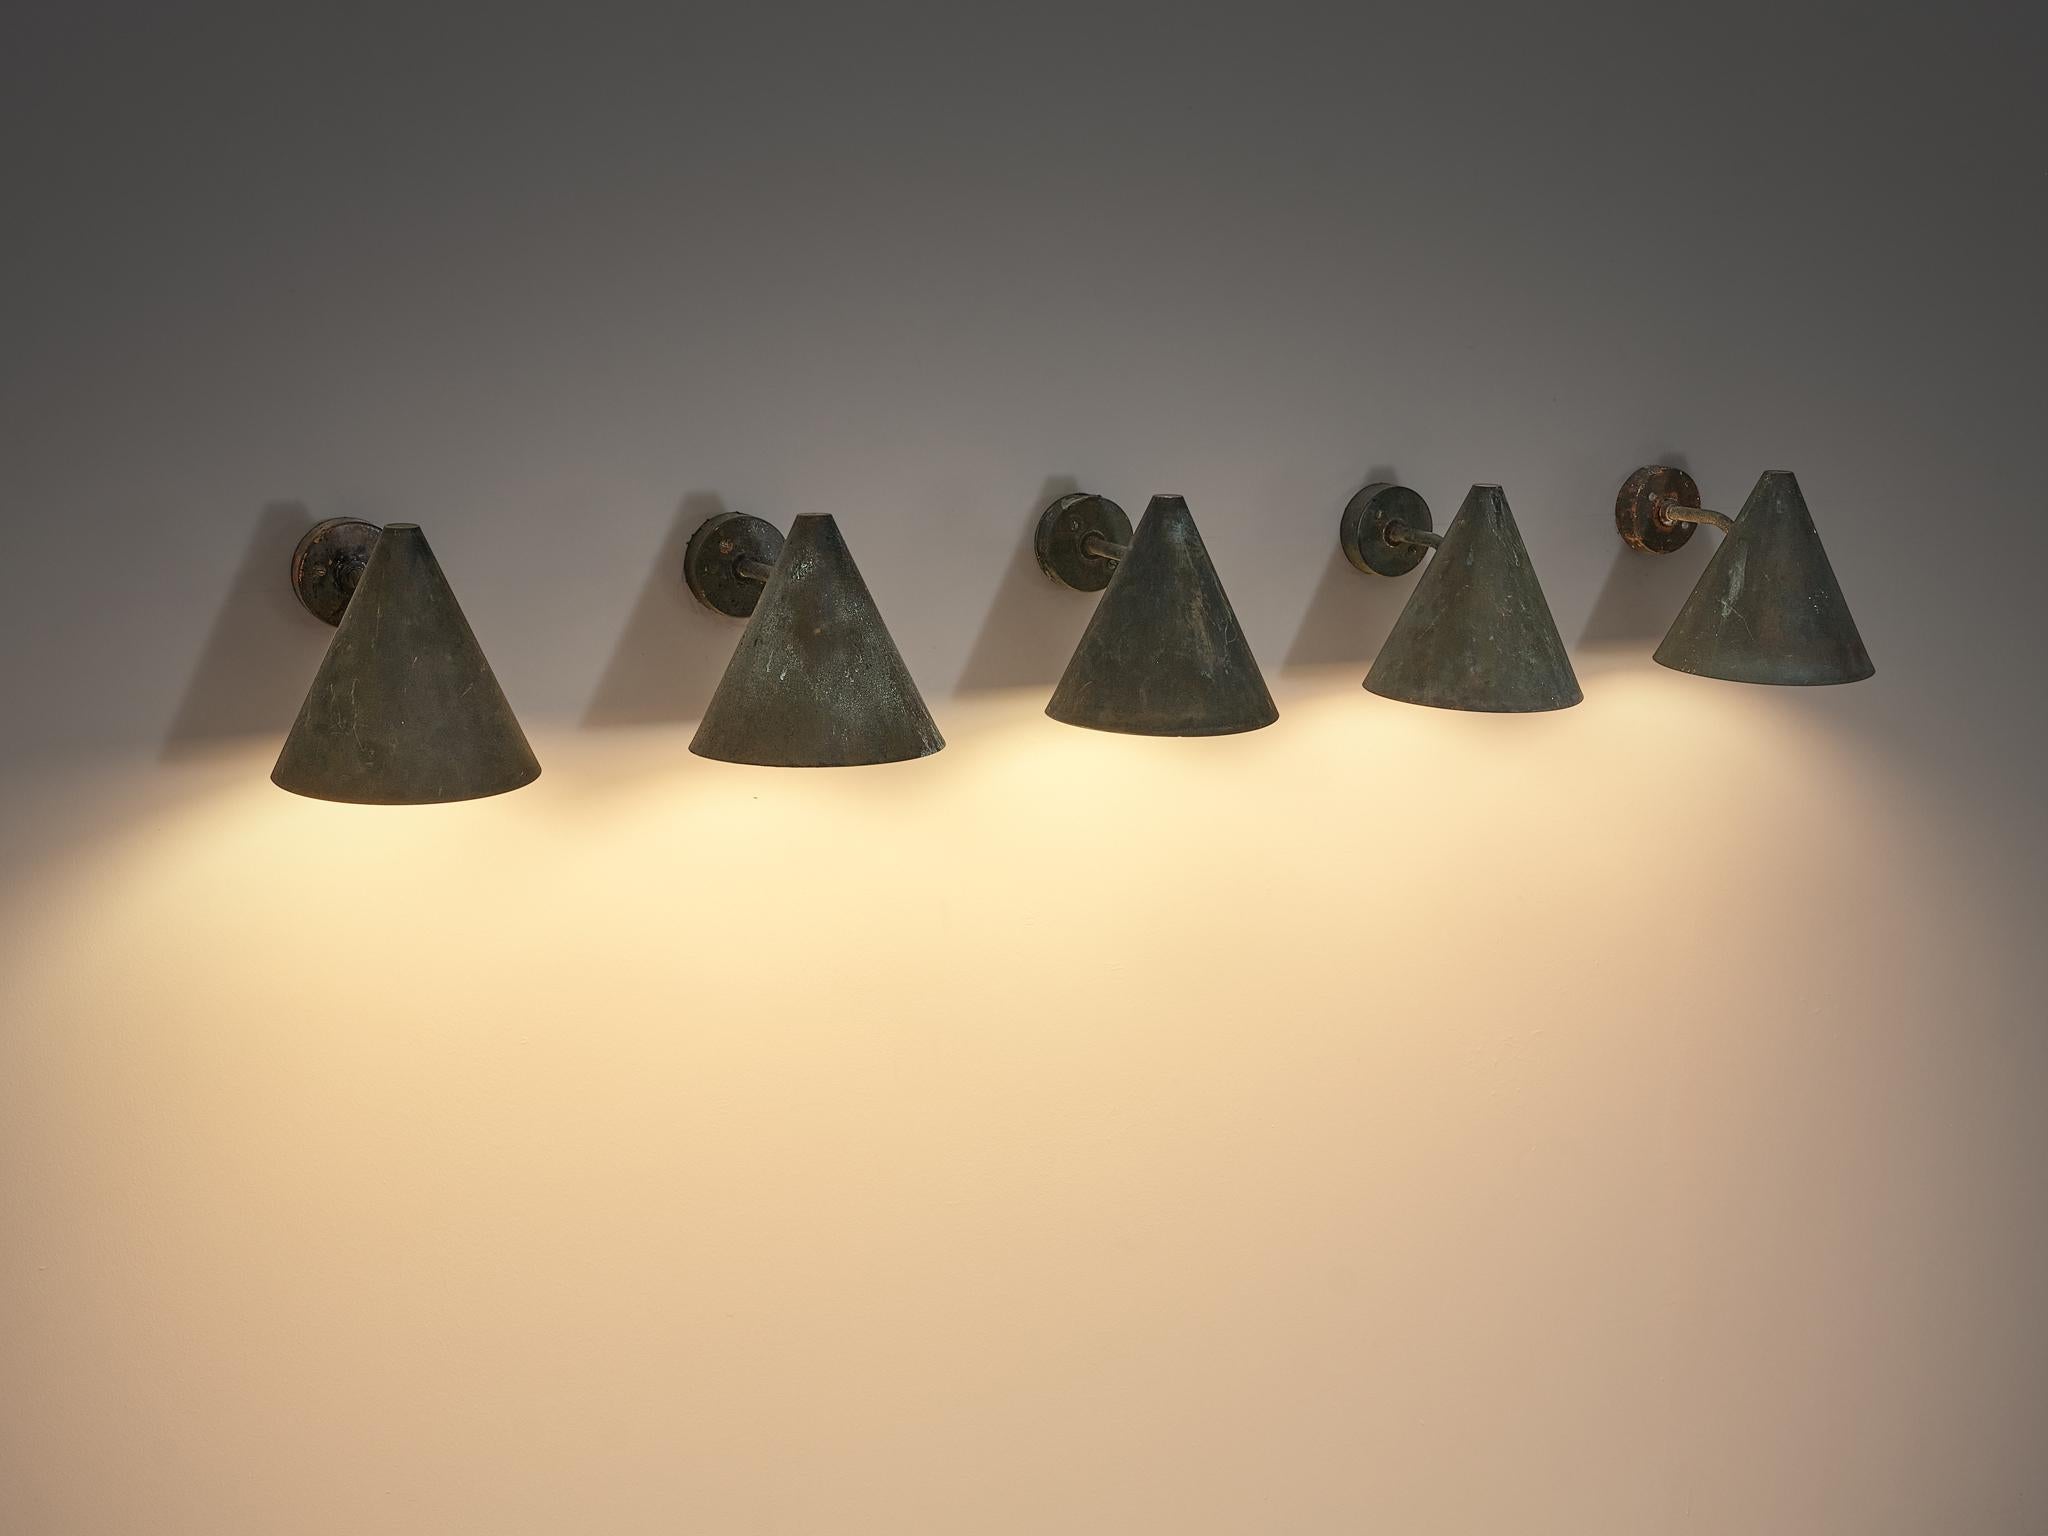  Hans-Agne Jakobsson 'Tratten' Wall Lights in Patinated Copper For Sale 1